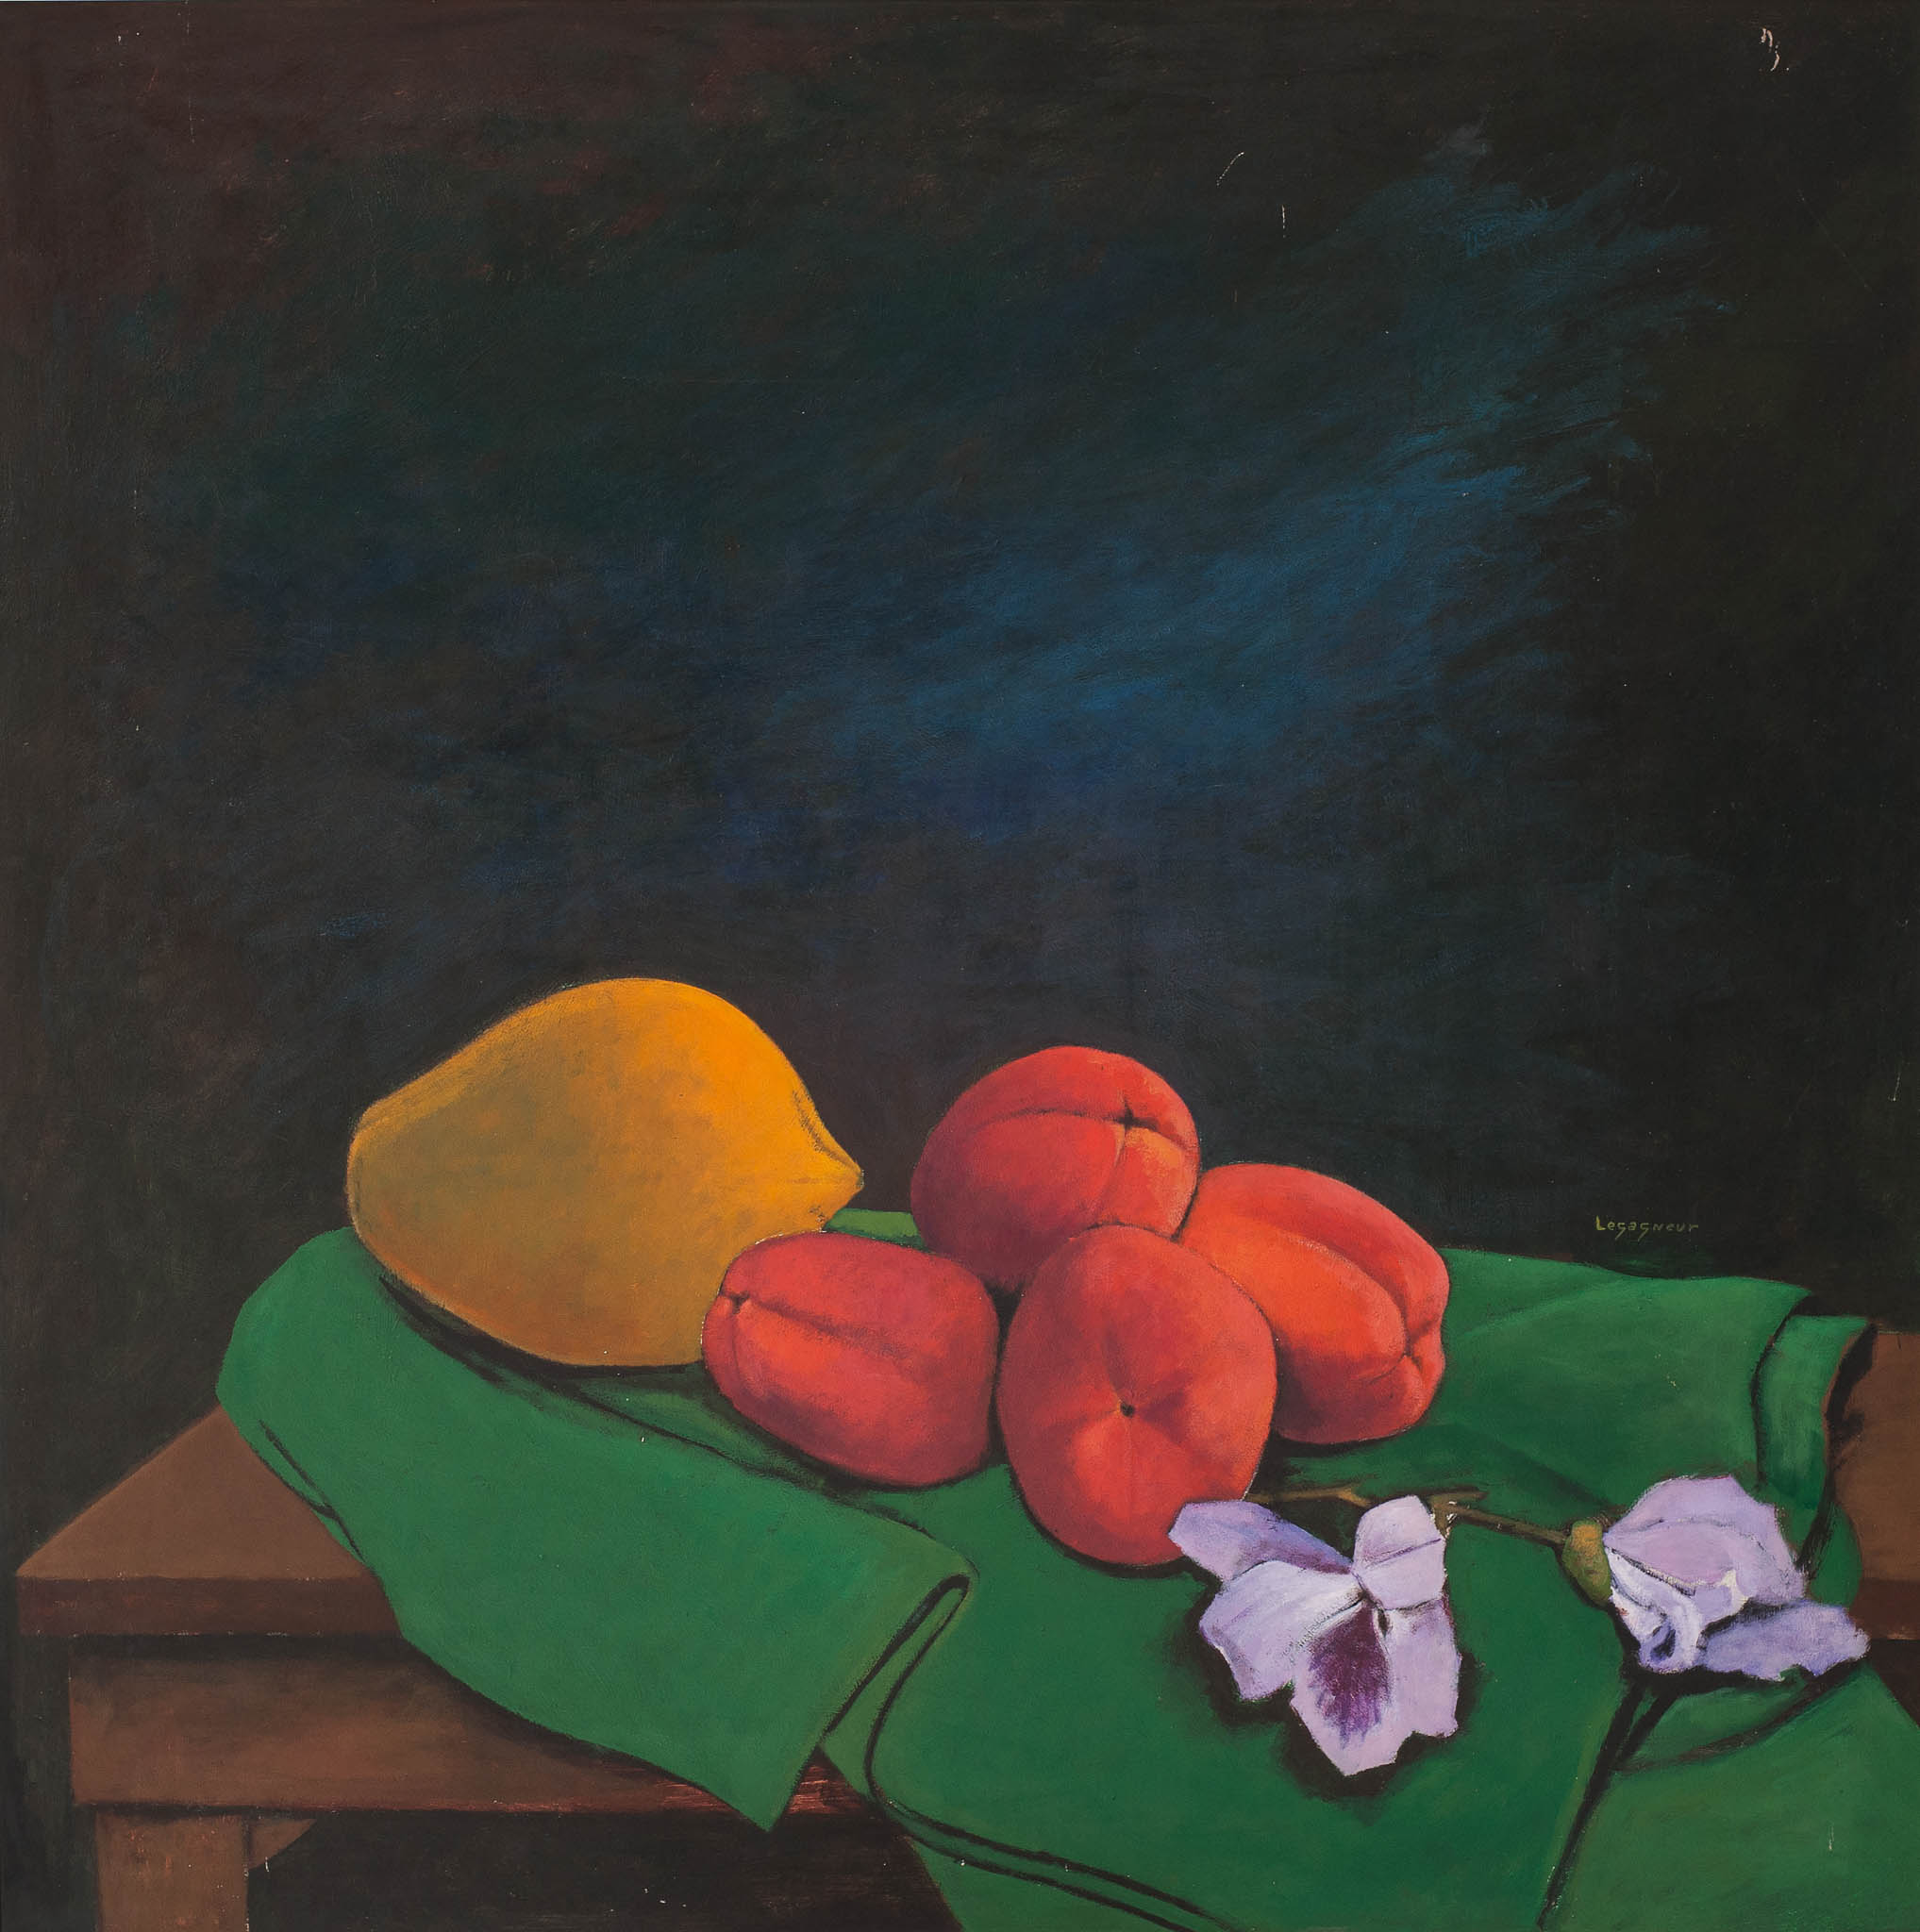 Fruit and Flowers, 1996